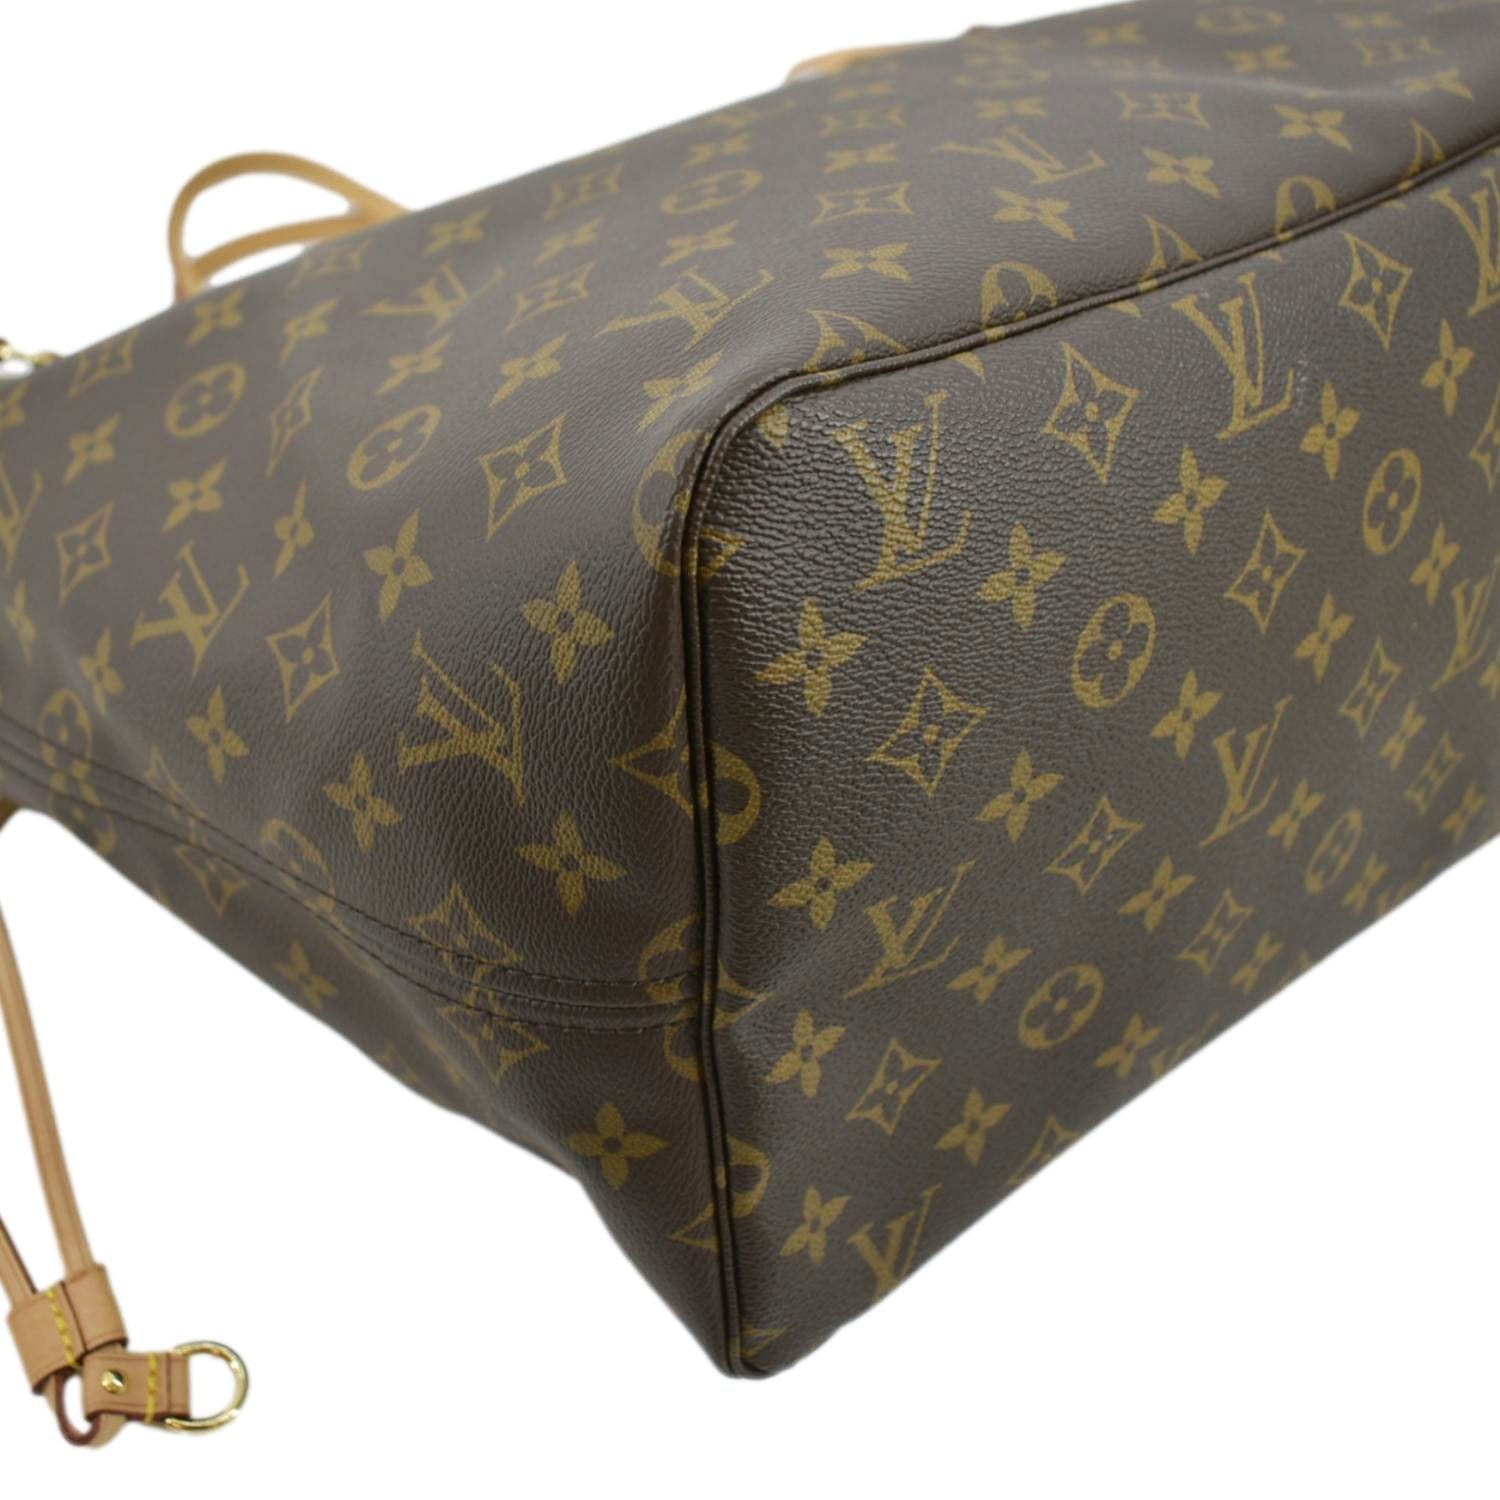 3 AMAZING OUTFITS THAT CAN BE WORN WITH THE BROWN LOUIS VUITTON NEVERFULL  MONOGRAM BAG